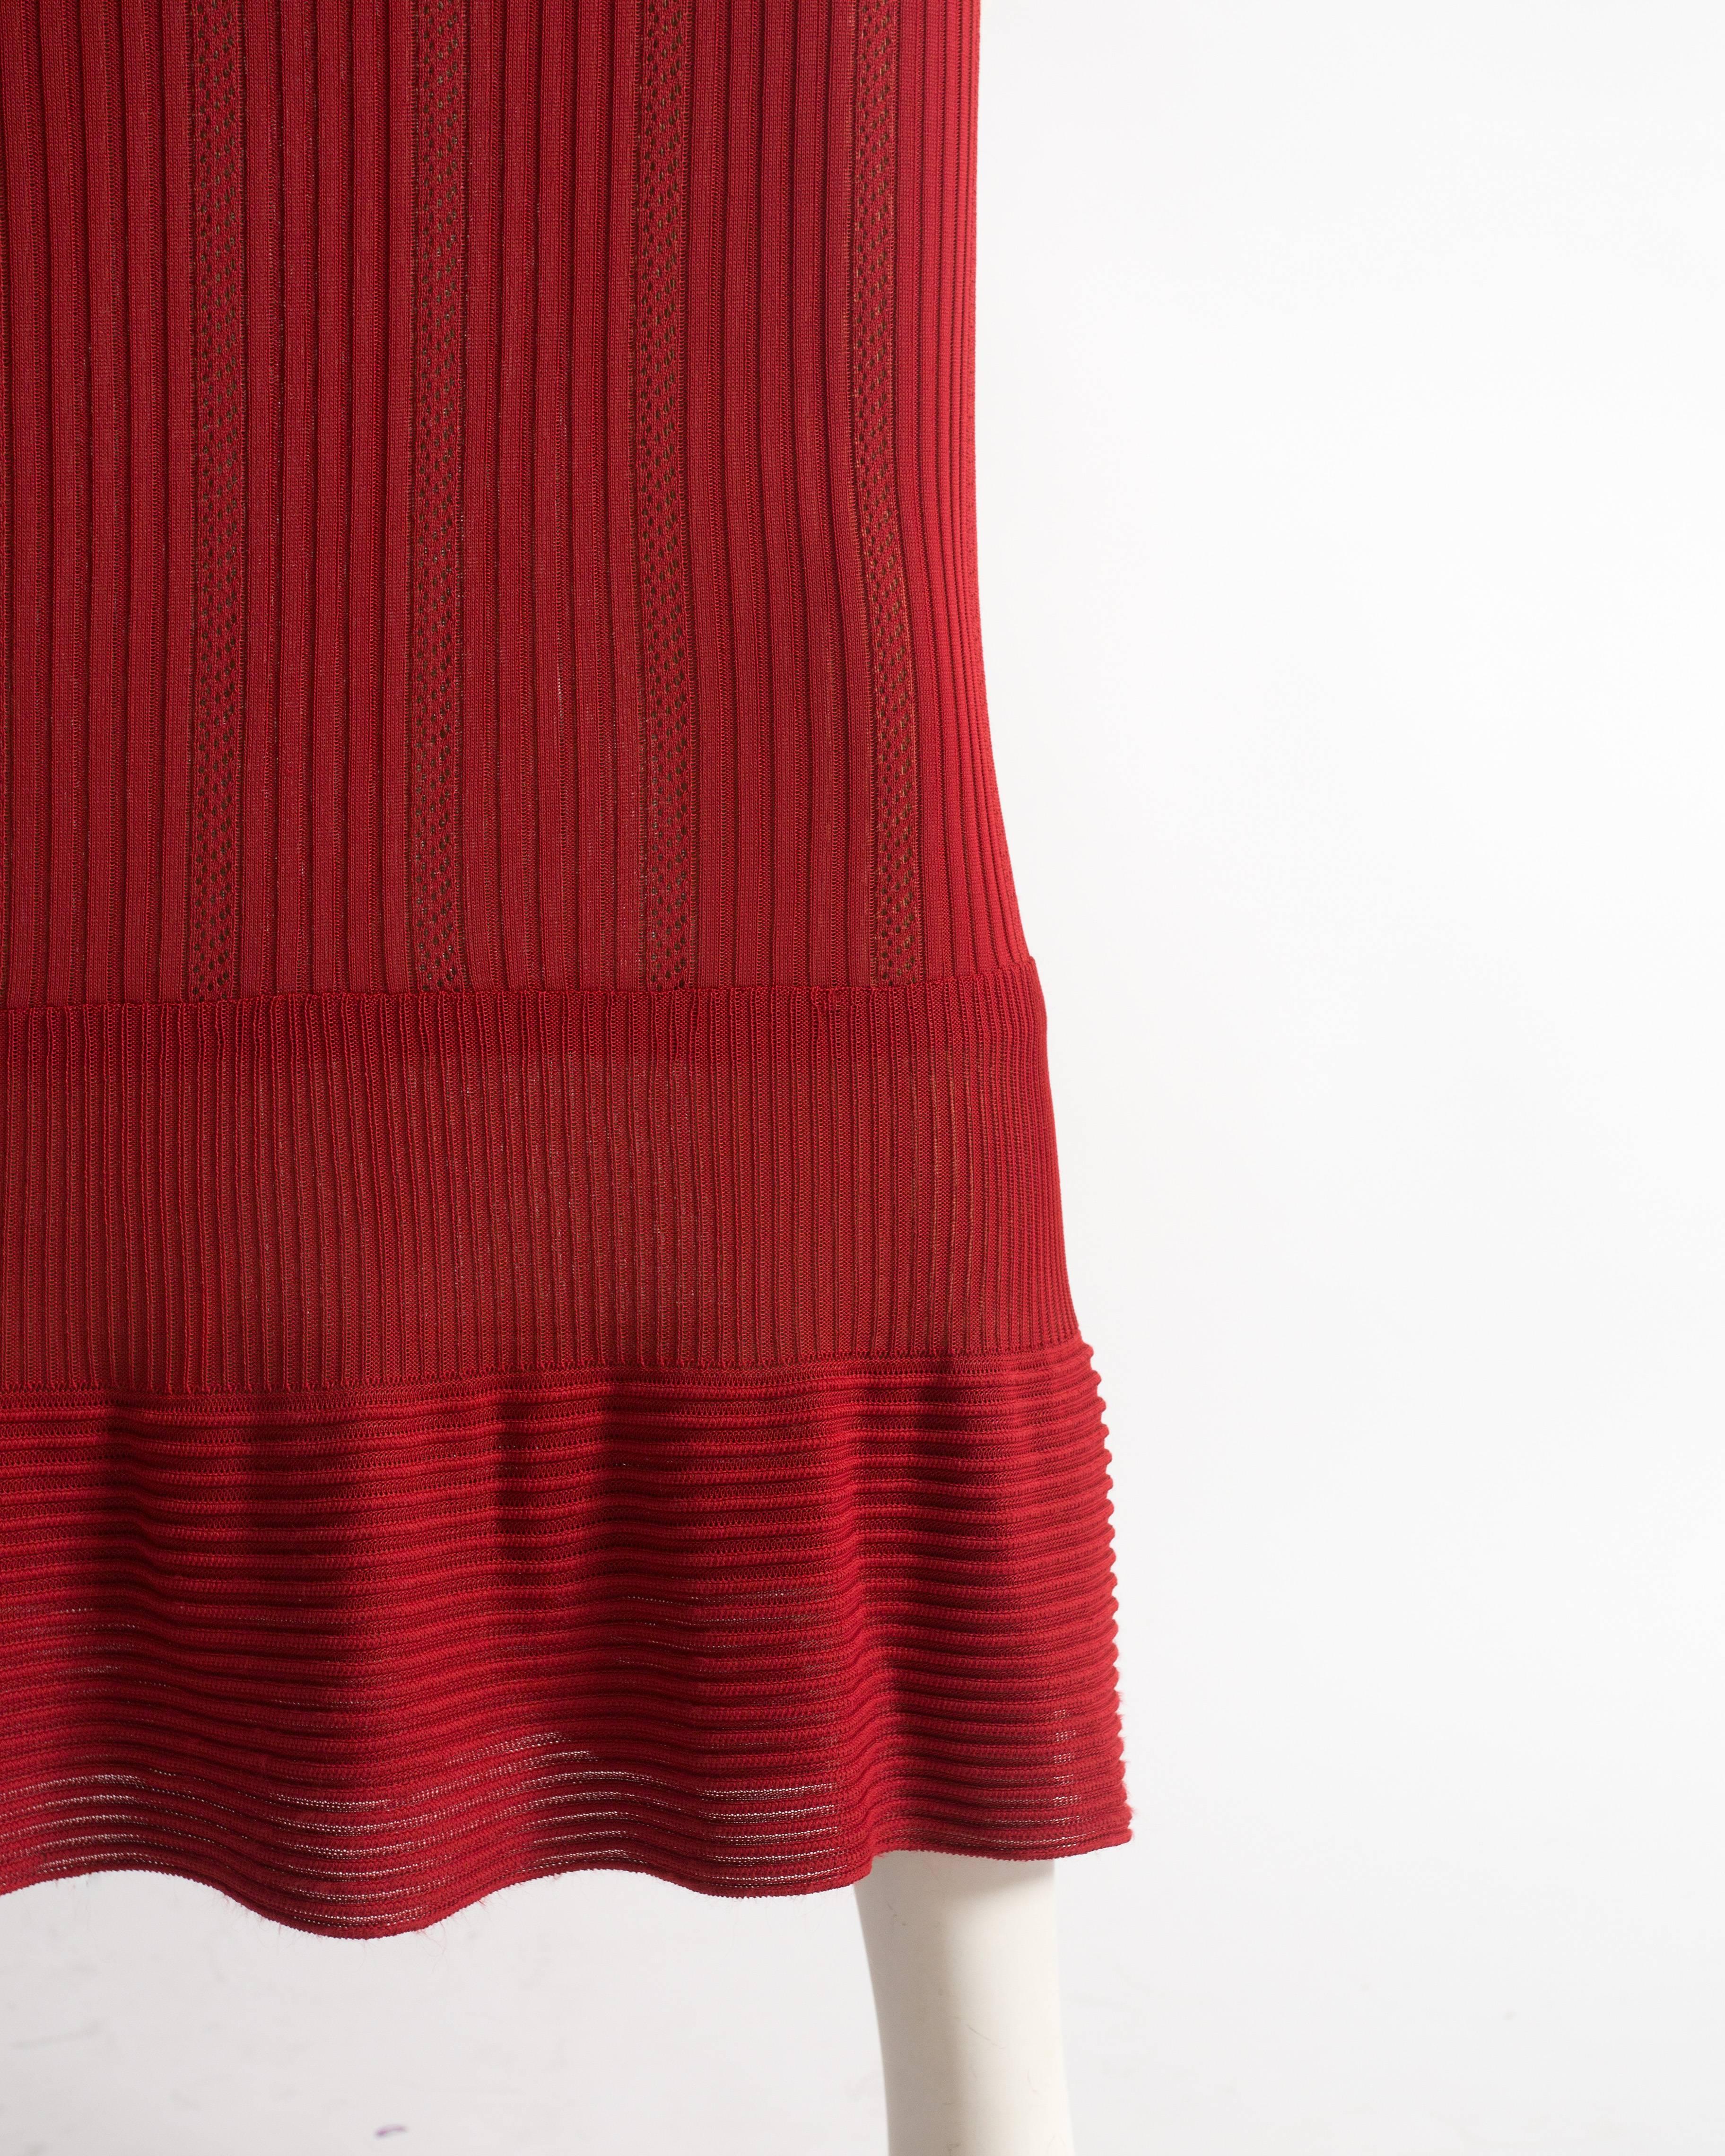 Azzedine Alaia red open knit fishtail evening dress, ss 1996 In Excellent Condition For Sale In London, GB